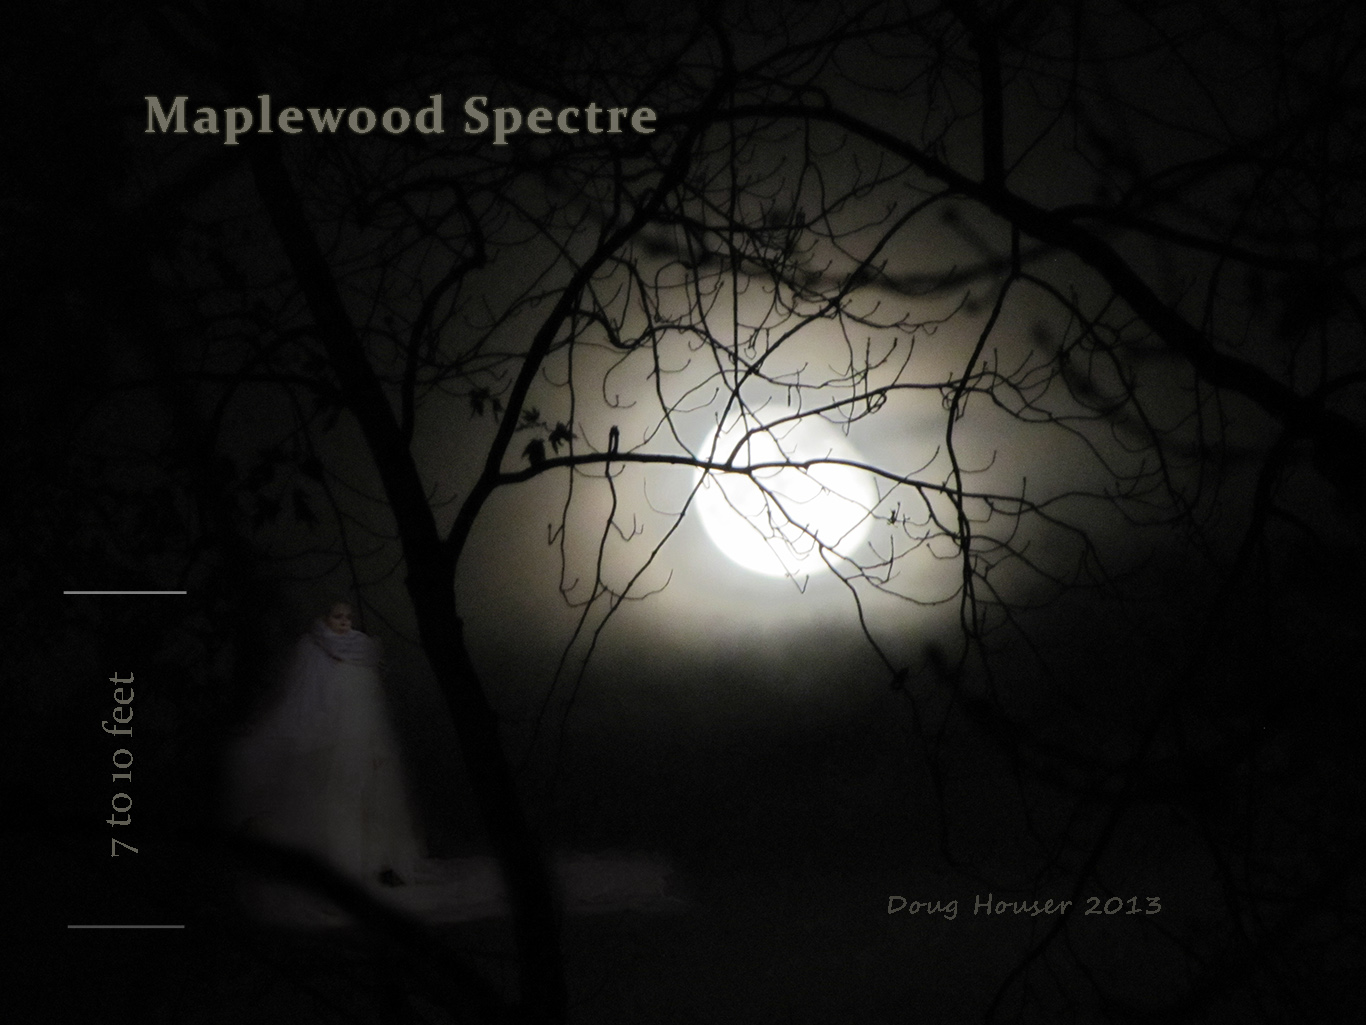 Maplewood History: The Ghosts of Halloweens Past